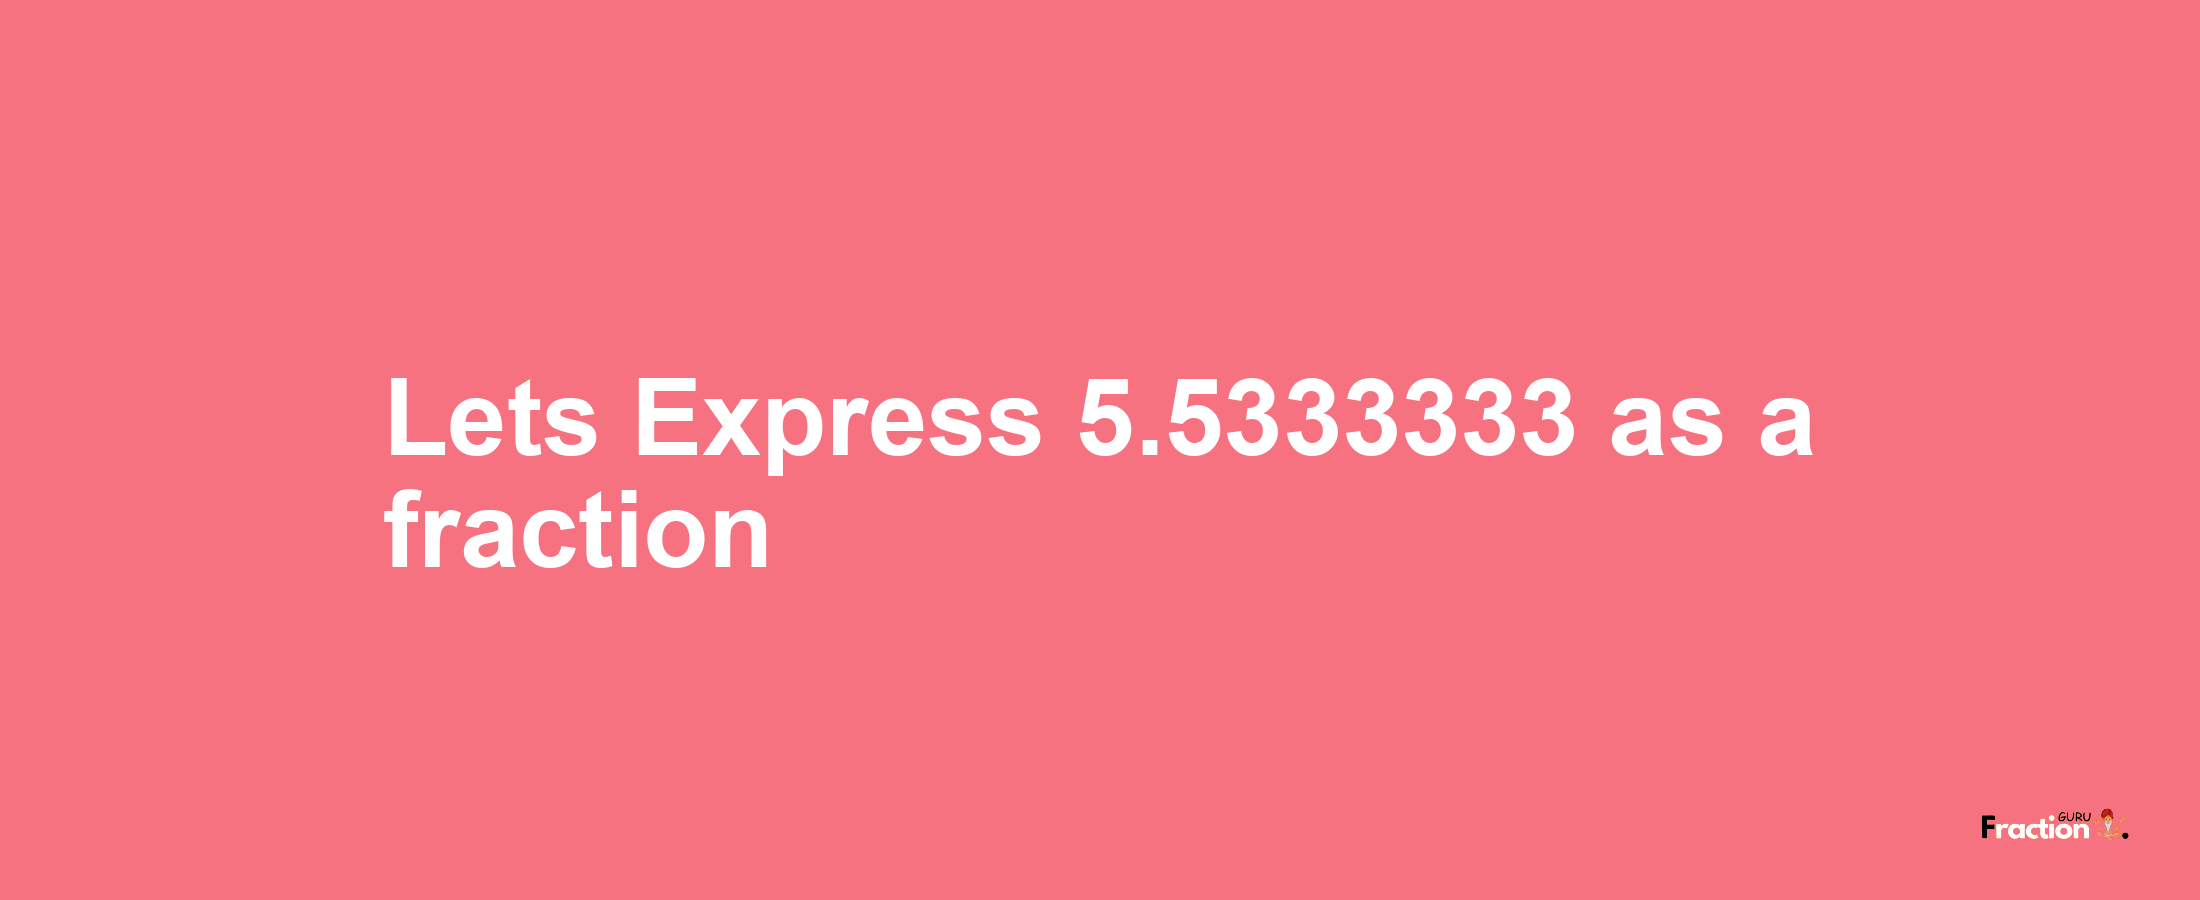 Lets Express 5.5333333 as afraction